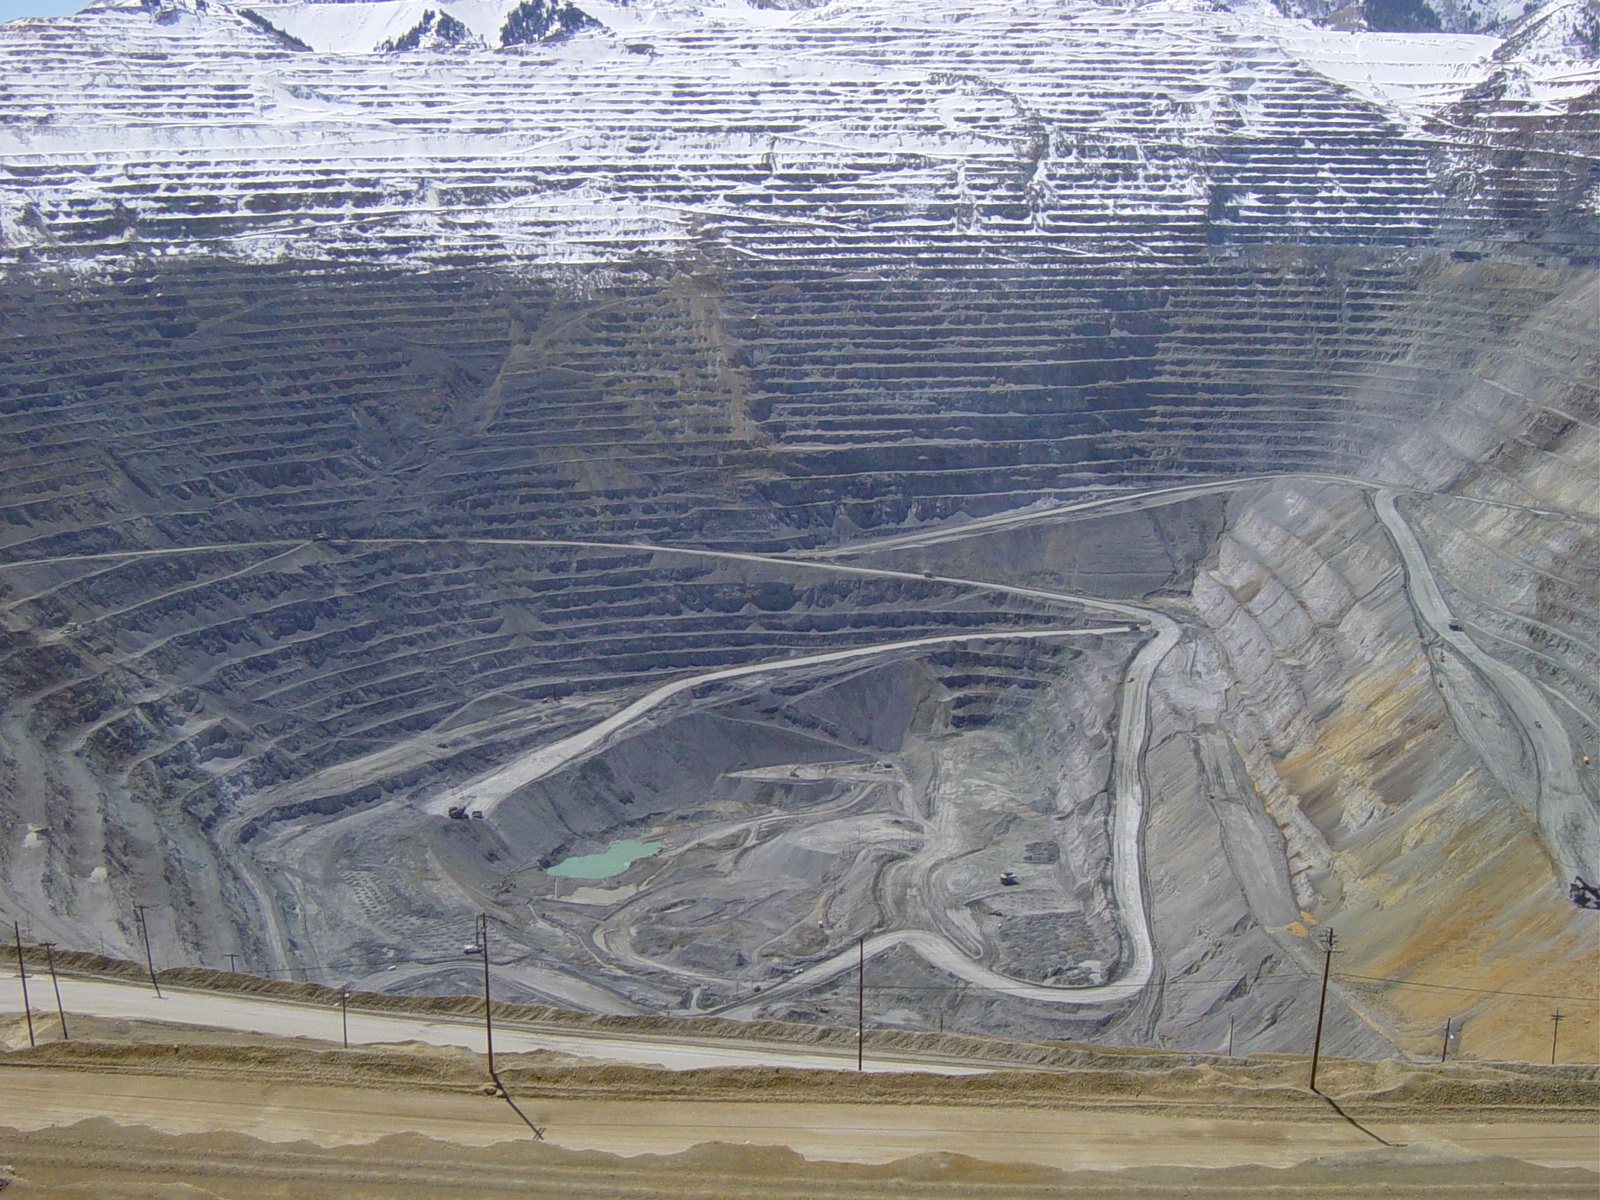 photograph of an Open Pit Mine